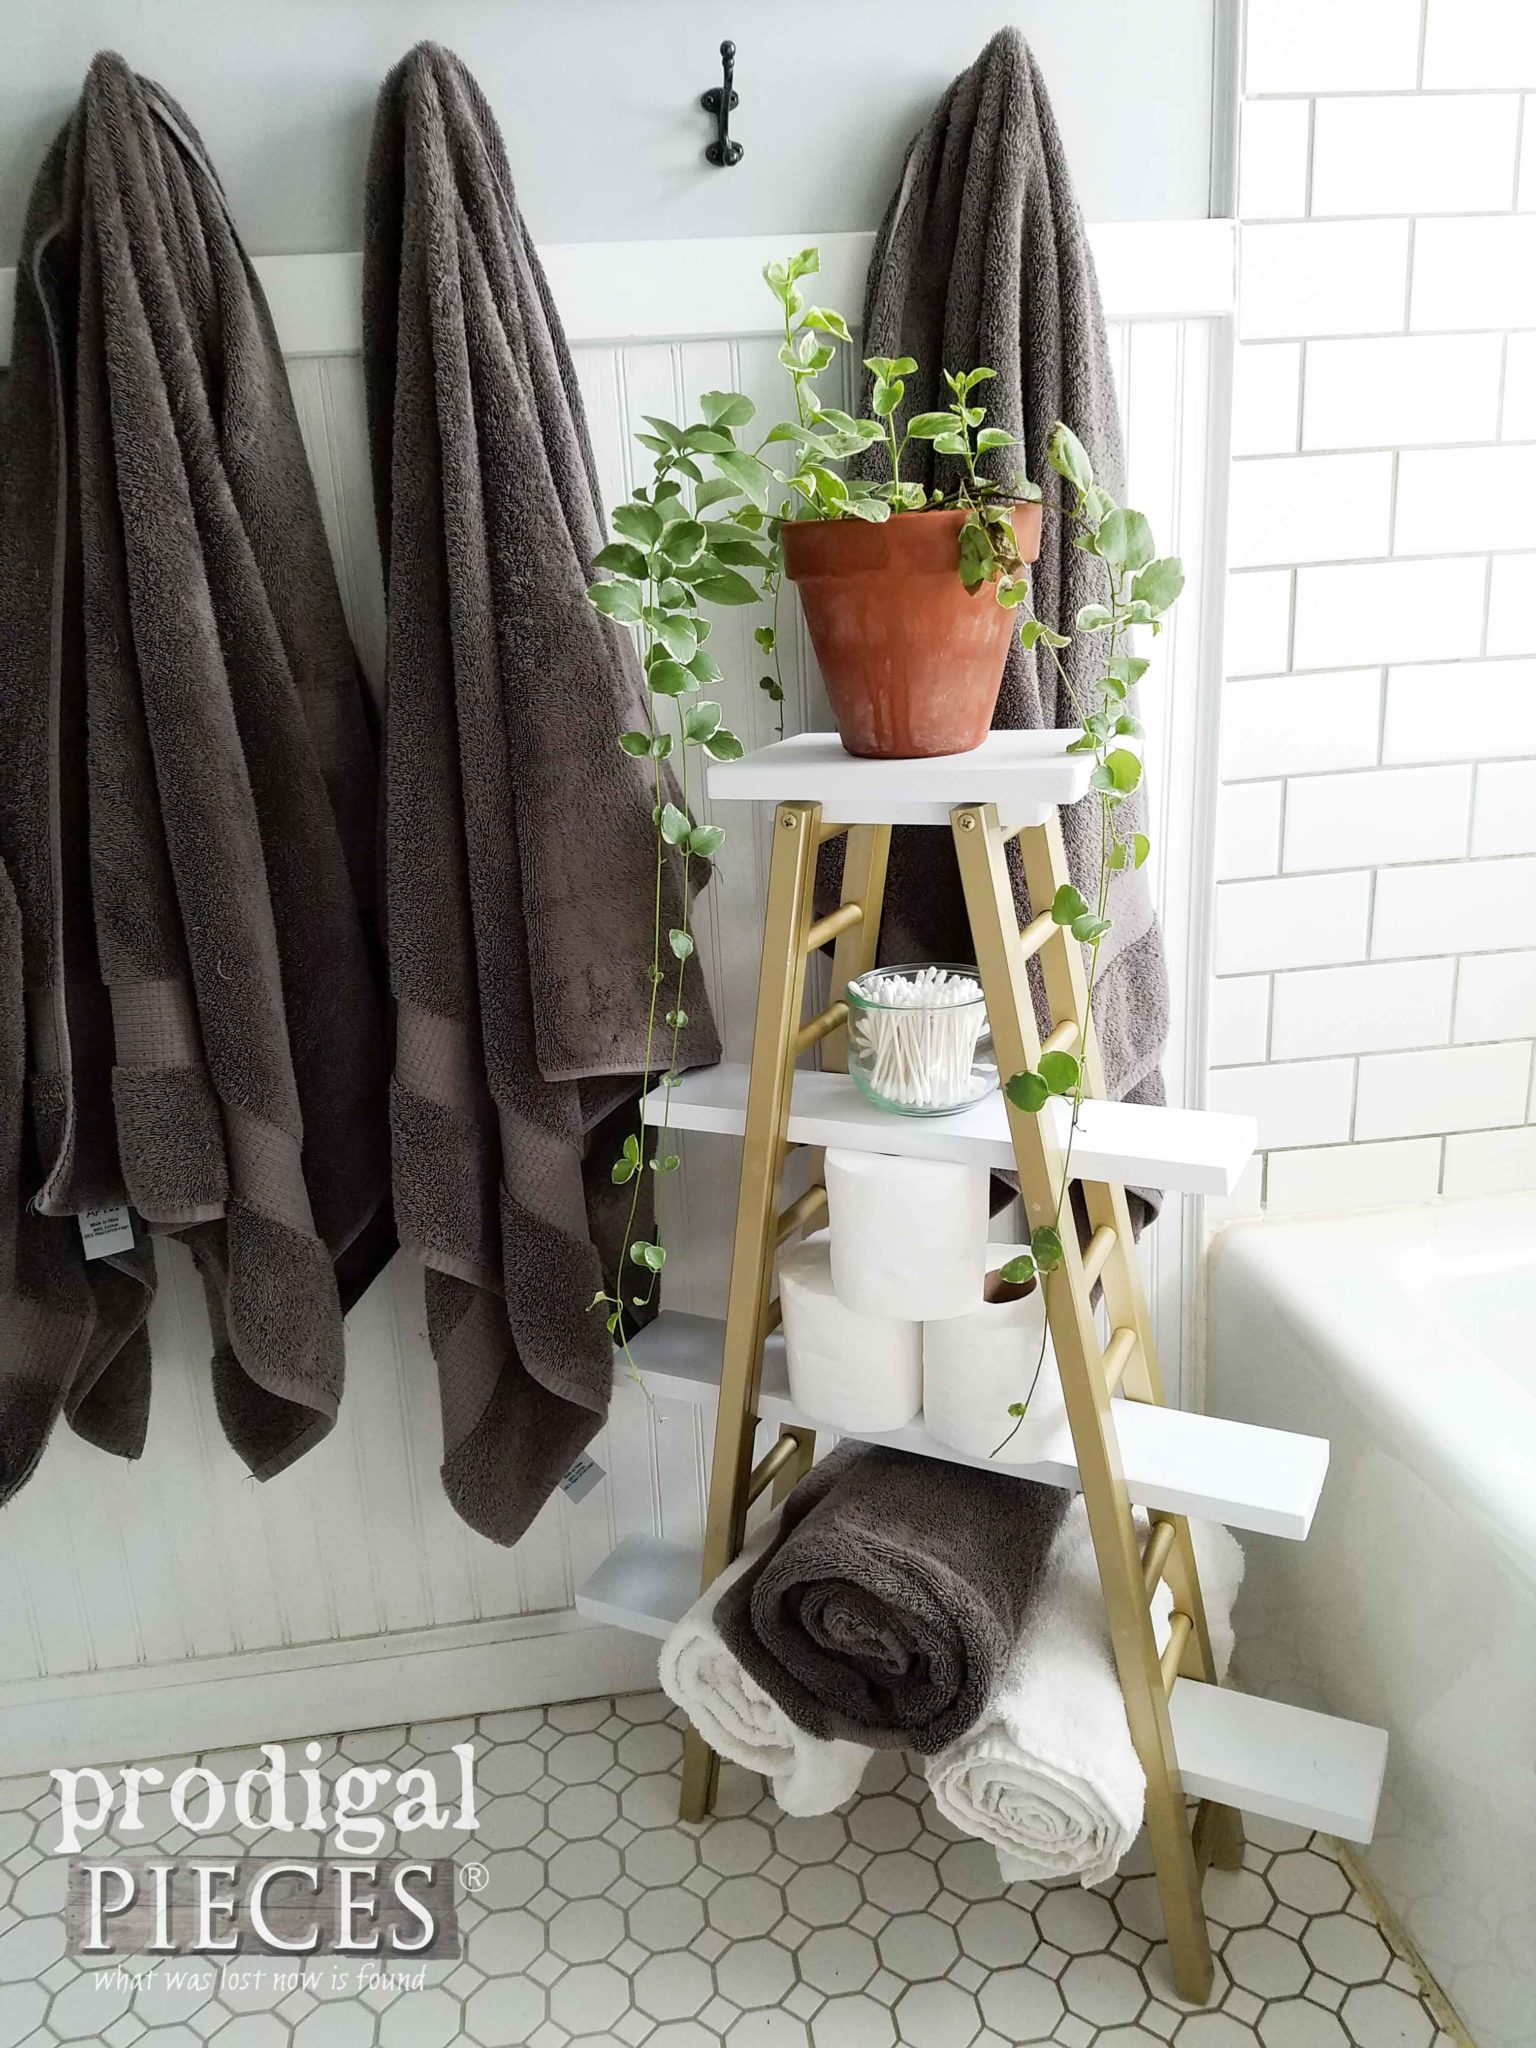 Repurposed Bathroom Upcycled Storage for Towels, TP and more in a Modern Chic Bath by Prodigal Pieces | prodigalpieces.com